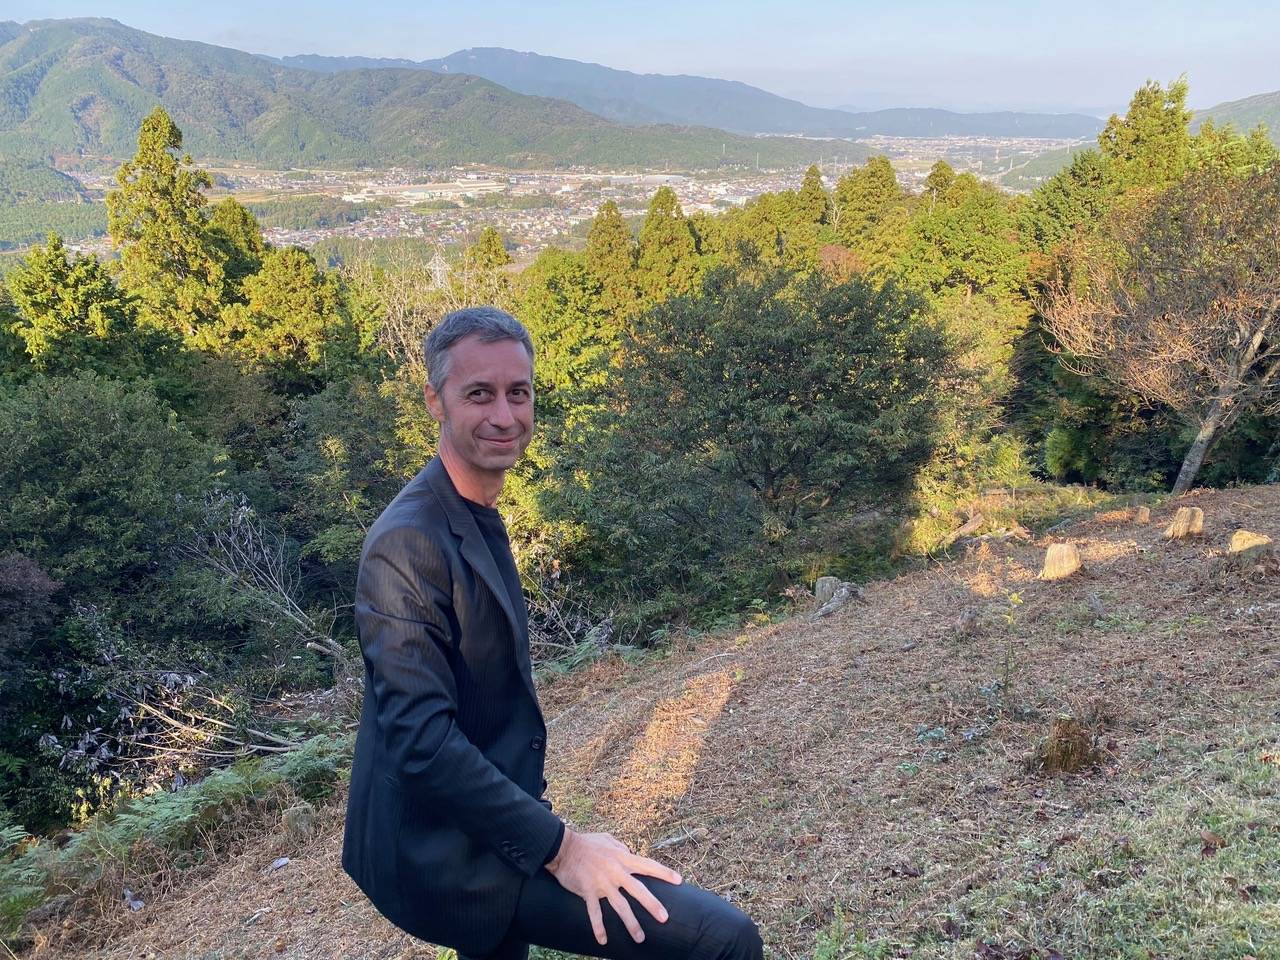 Chris Glenn, author of “The Battle of Sekigahara,” was appointed as Sekigahara’s tourism ambassador after the publication of his first book on the historic battle in 2014. | COURTESY OF CHRIS GLENN